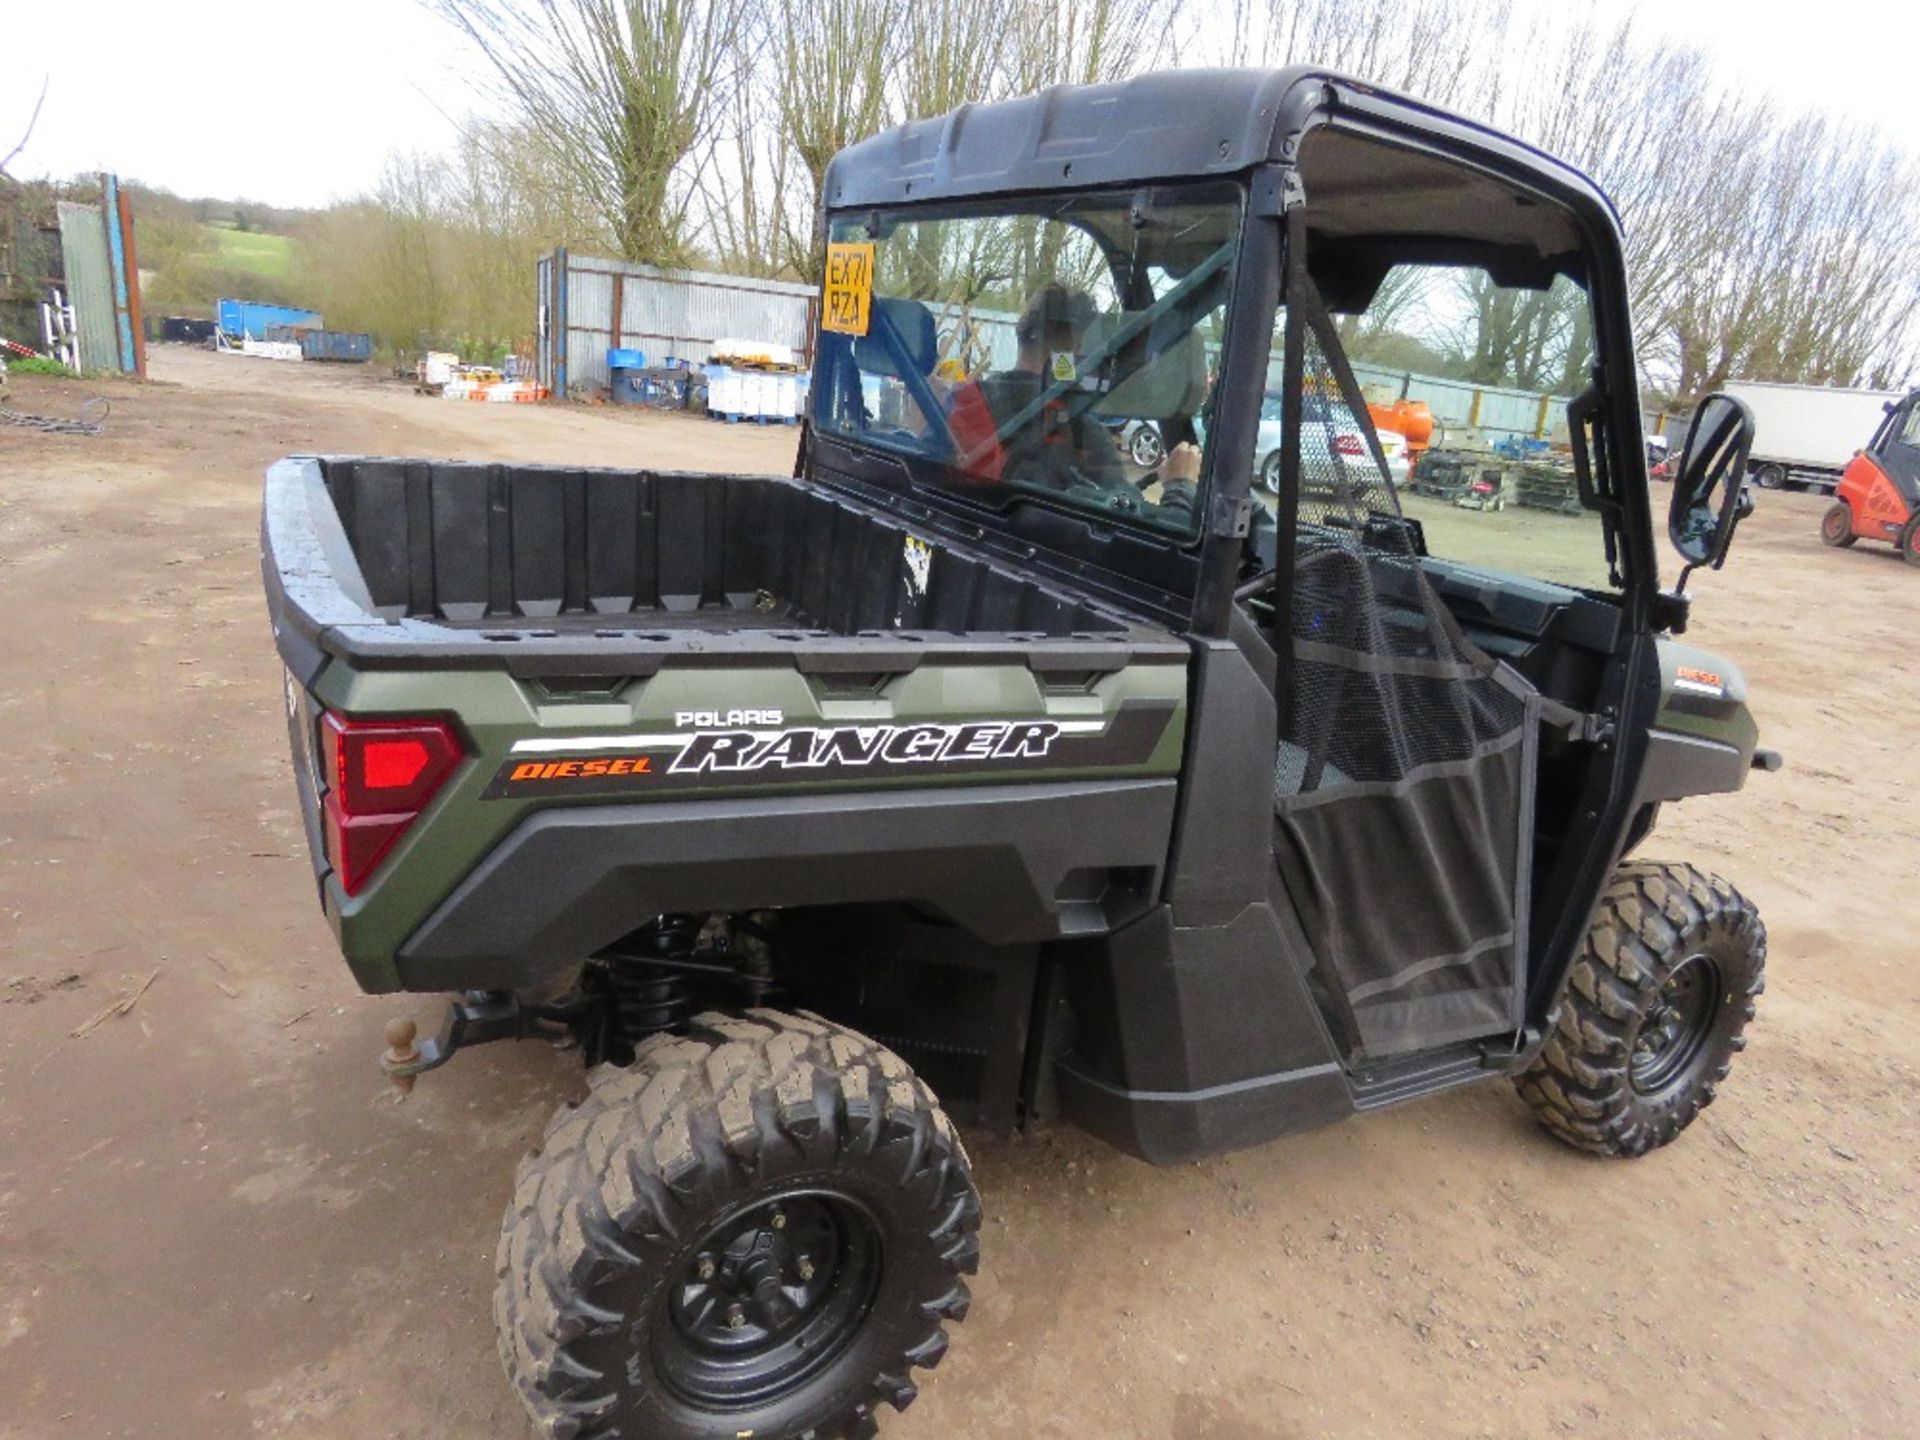 POLARIS 902 DIESEL RANGER WITH KUBOTA ENGINE, SCREEN ROOF AND BACK WINDOW. REG:EX71 RZA WITH V5, FIR - Image 8 of 12